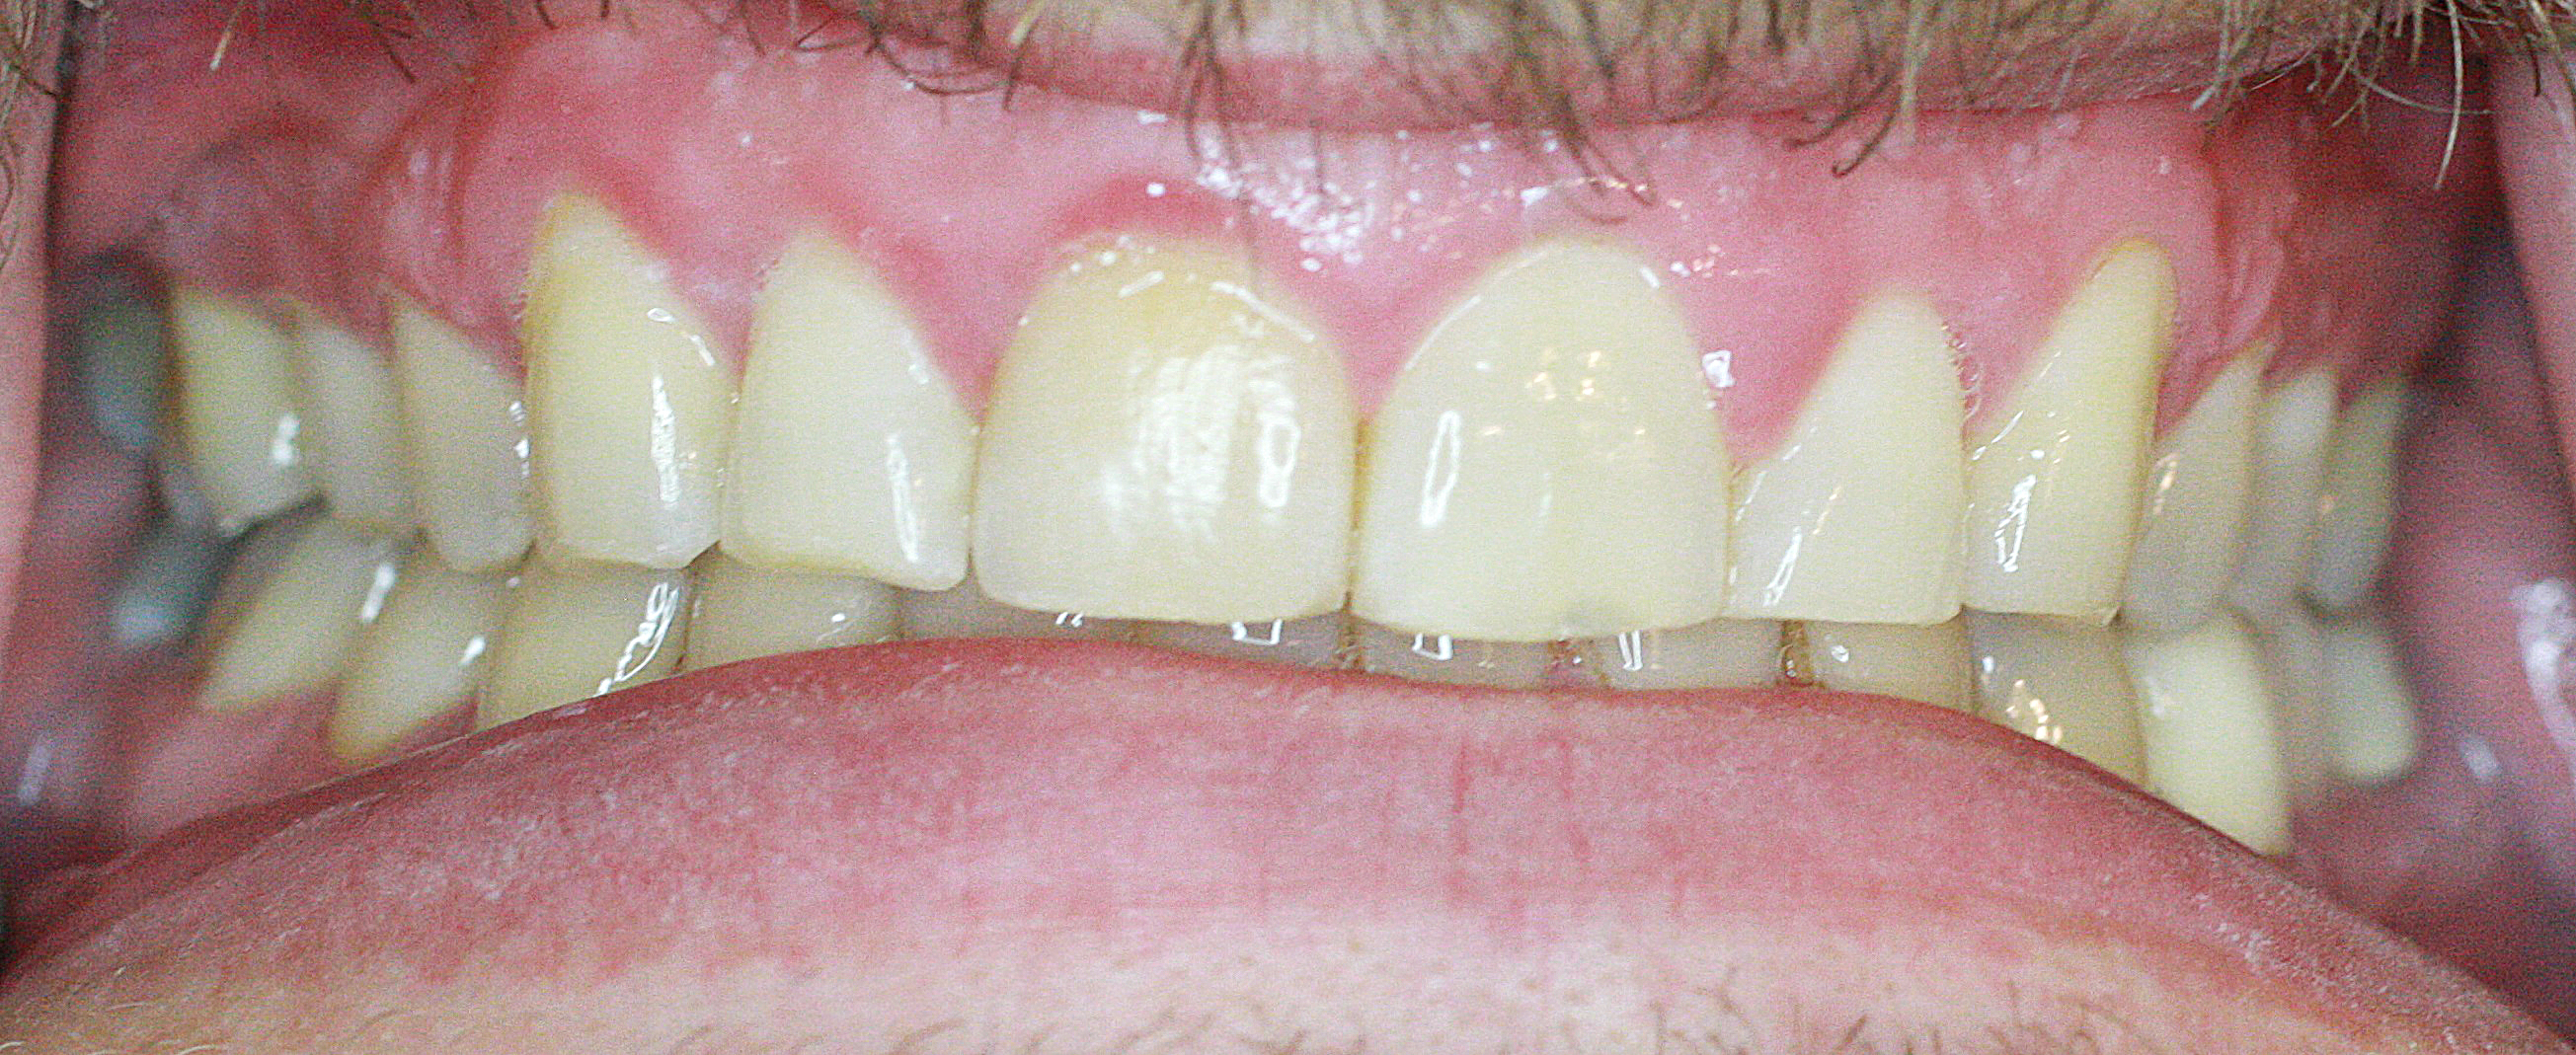 Invisalign Case 1 after